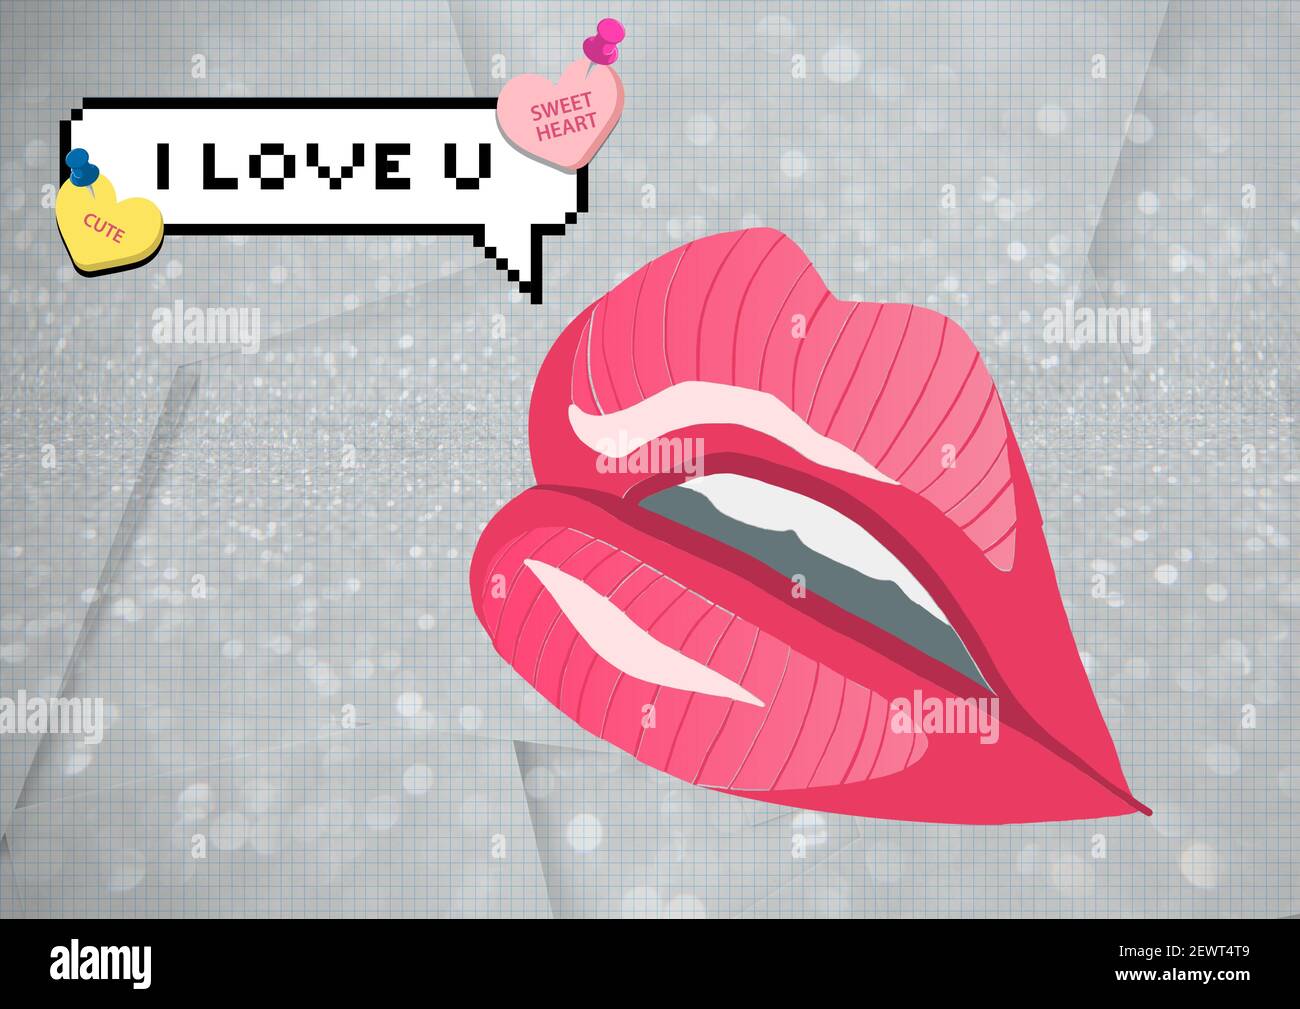 I love u text in speech bubble with hearts with pink lips on pixelated grey background Stock Photo